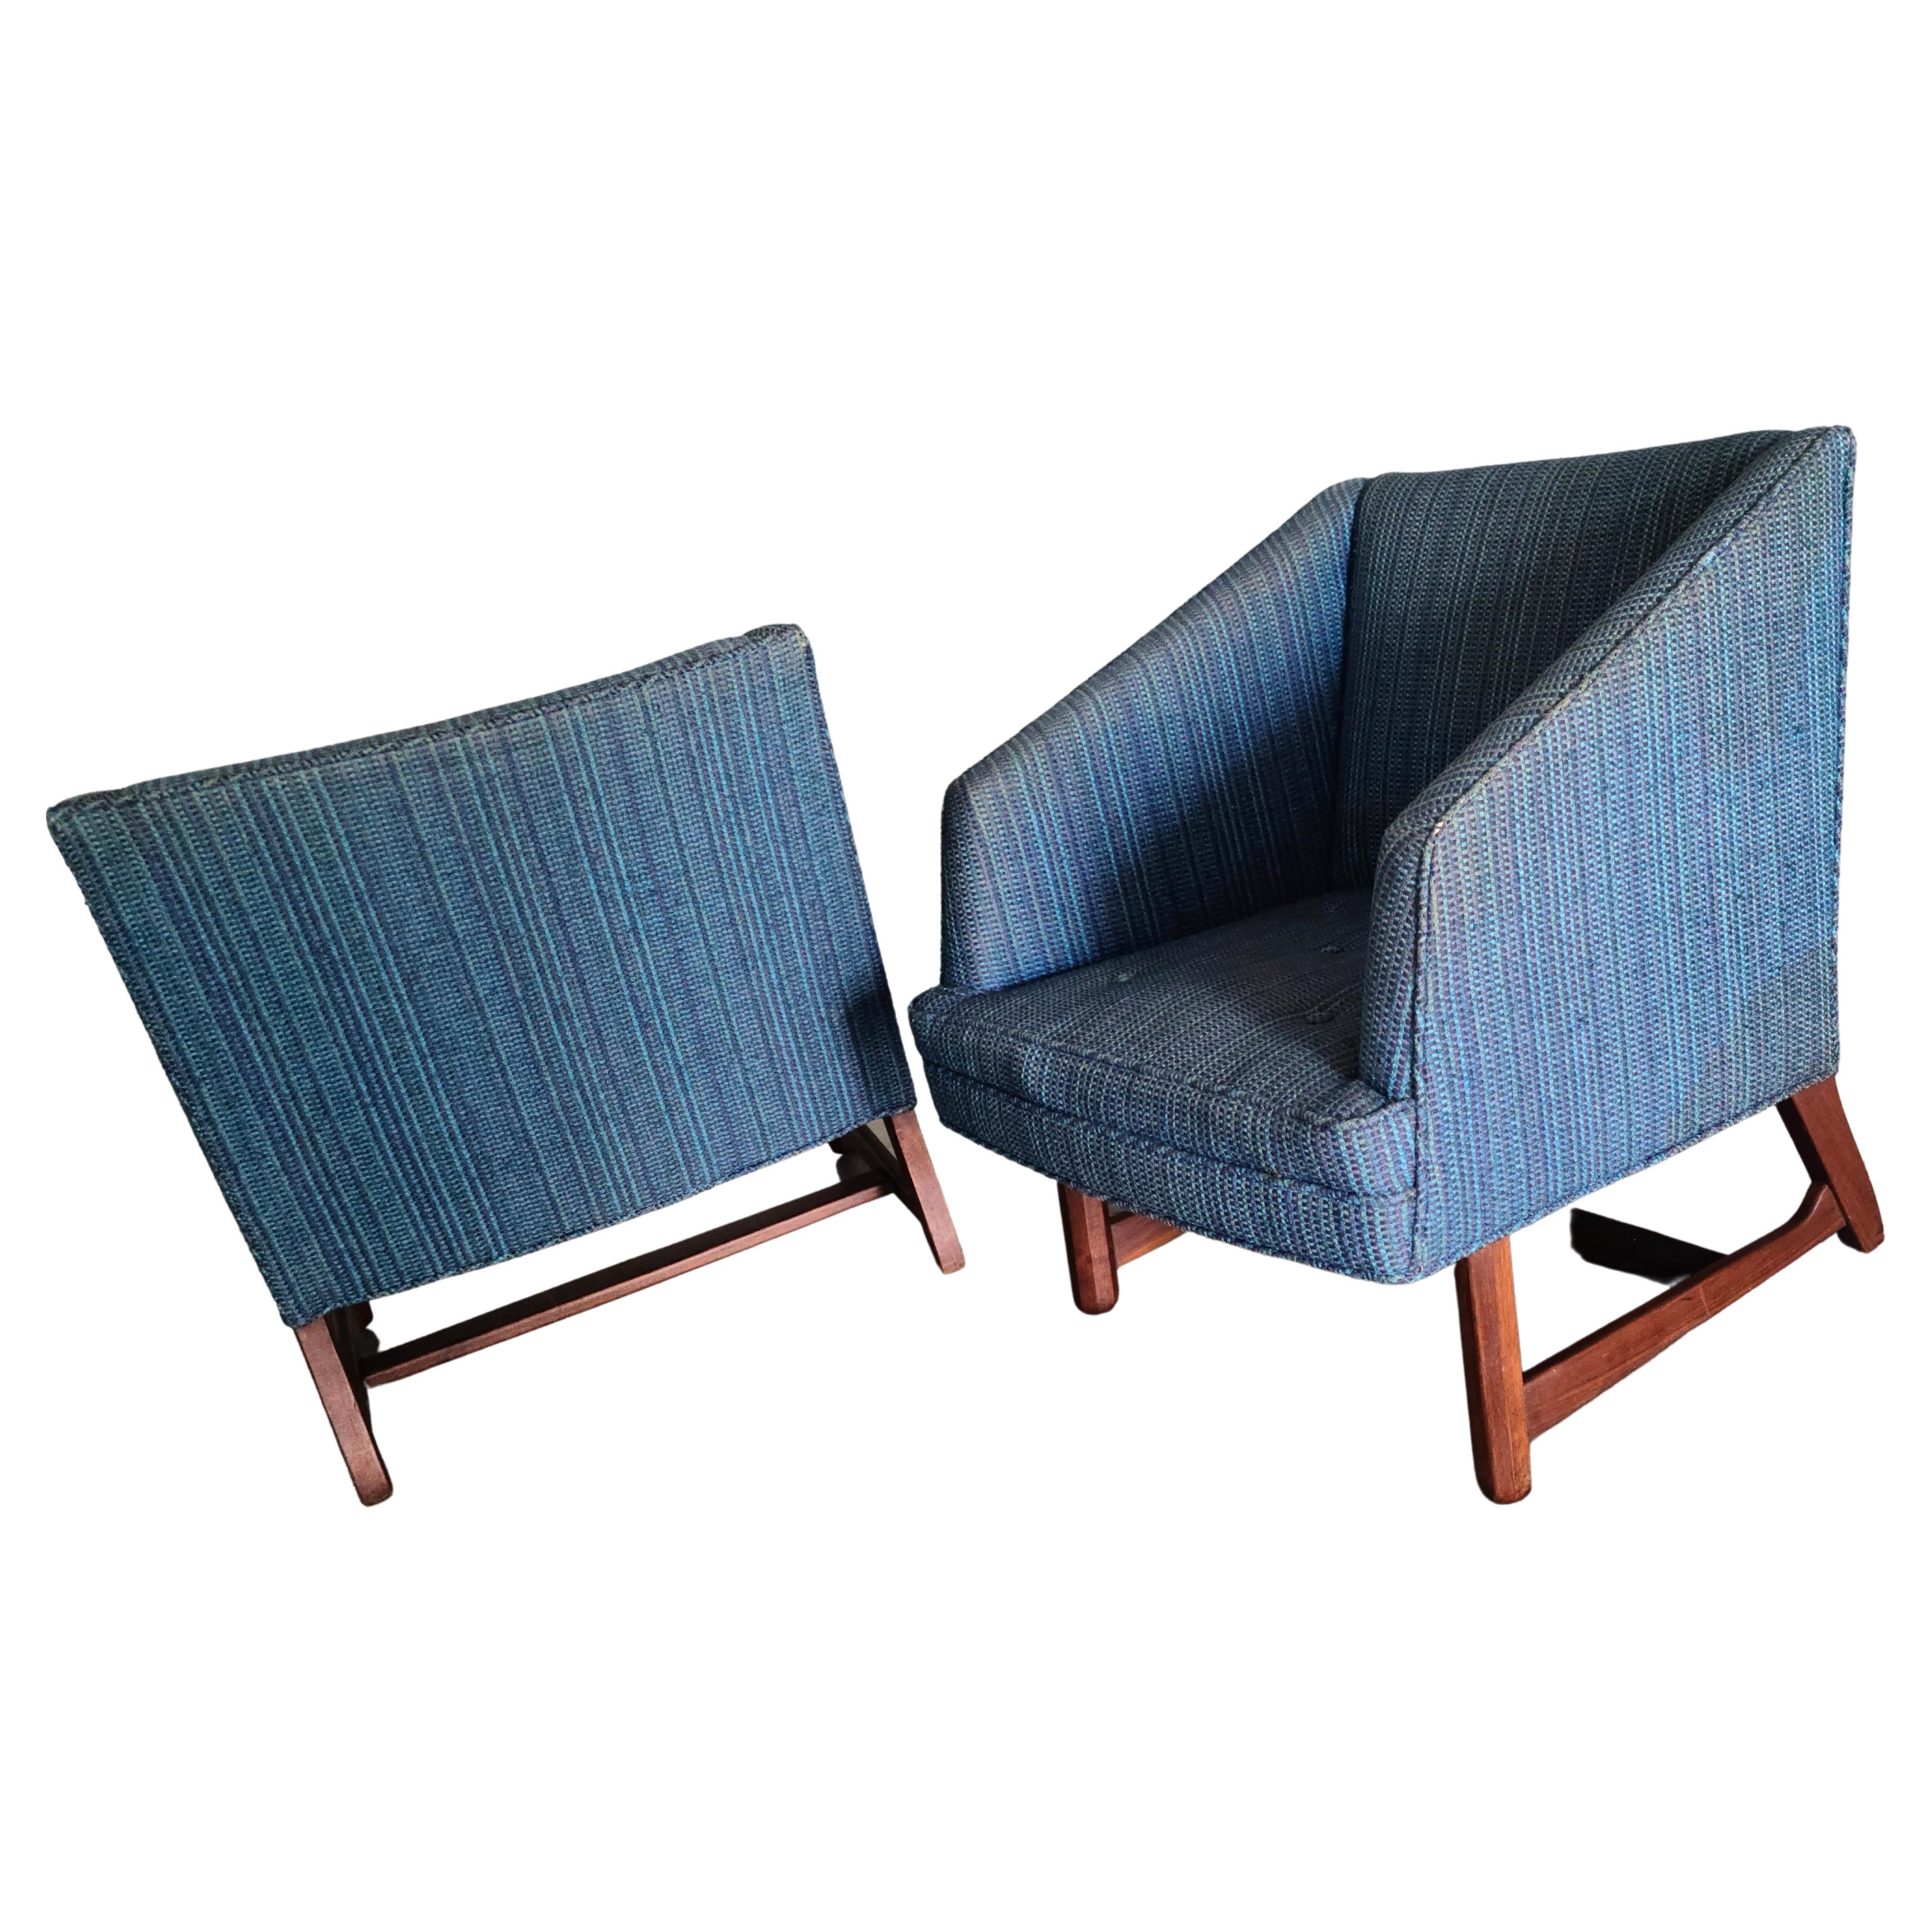 Please feel free to reach out for accurate shipping to your location.

Pair Wedge Lounge Chairs. 
Sculpted Walnut Base. 
Front legs are Octagonal with Ball Point. 
Side to side stretcher in a slightly elliptical shape.

In the style of Edward